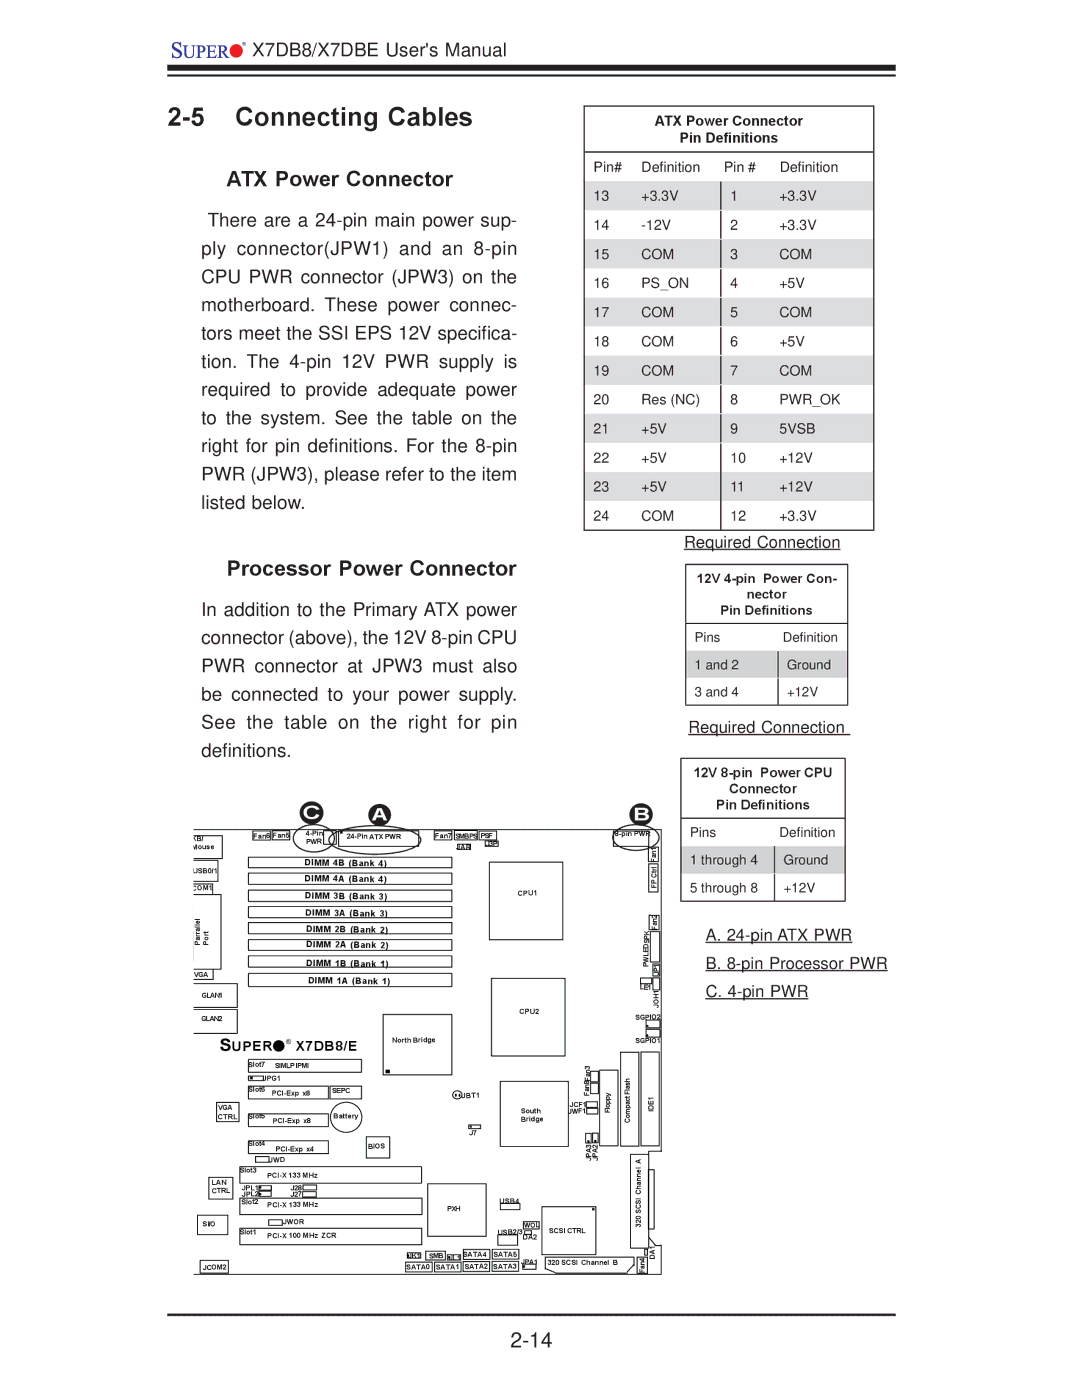 SUPER MICRO Computer X7DBE, X7DB8 user manual Connecting Cables, ATX Power Connector, Processor Power Connector 